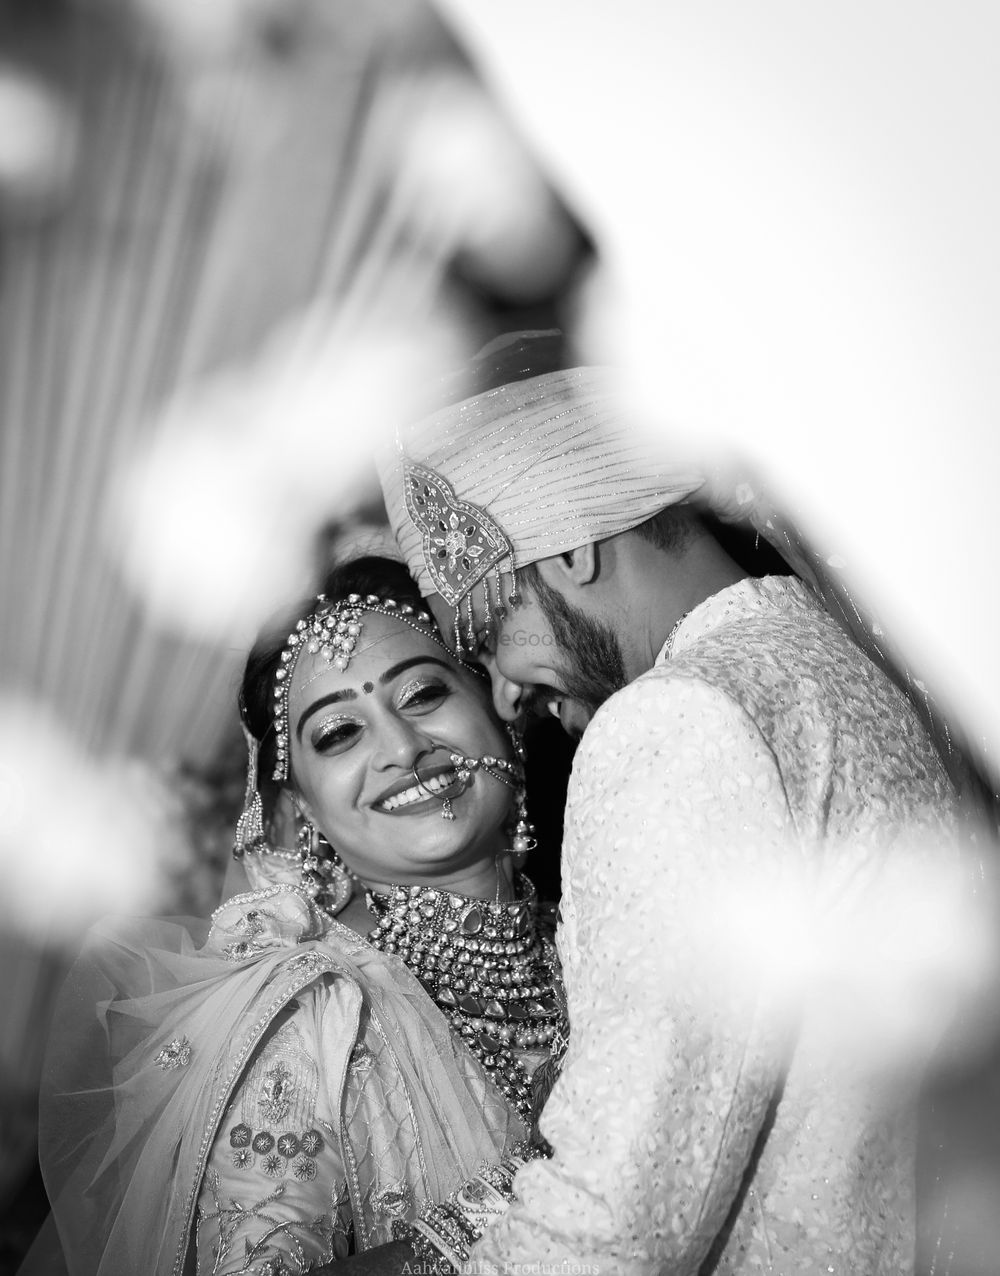 Photo From Prateek Weds Khushboo - By Aahvaanbliss Productions